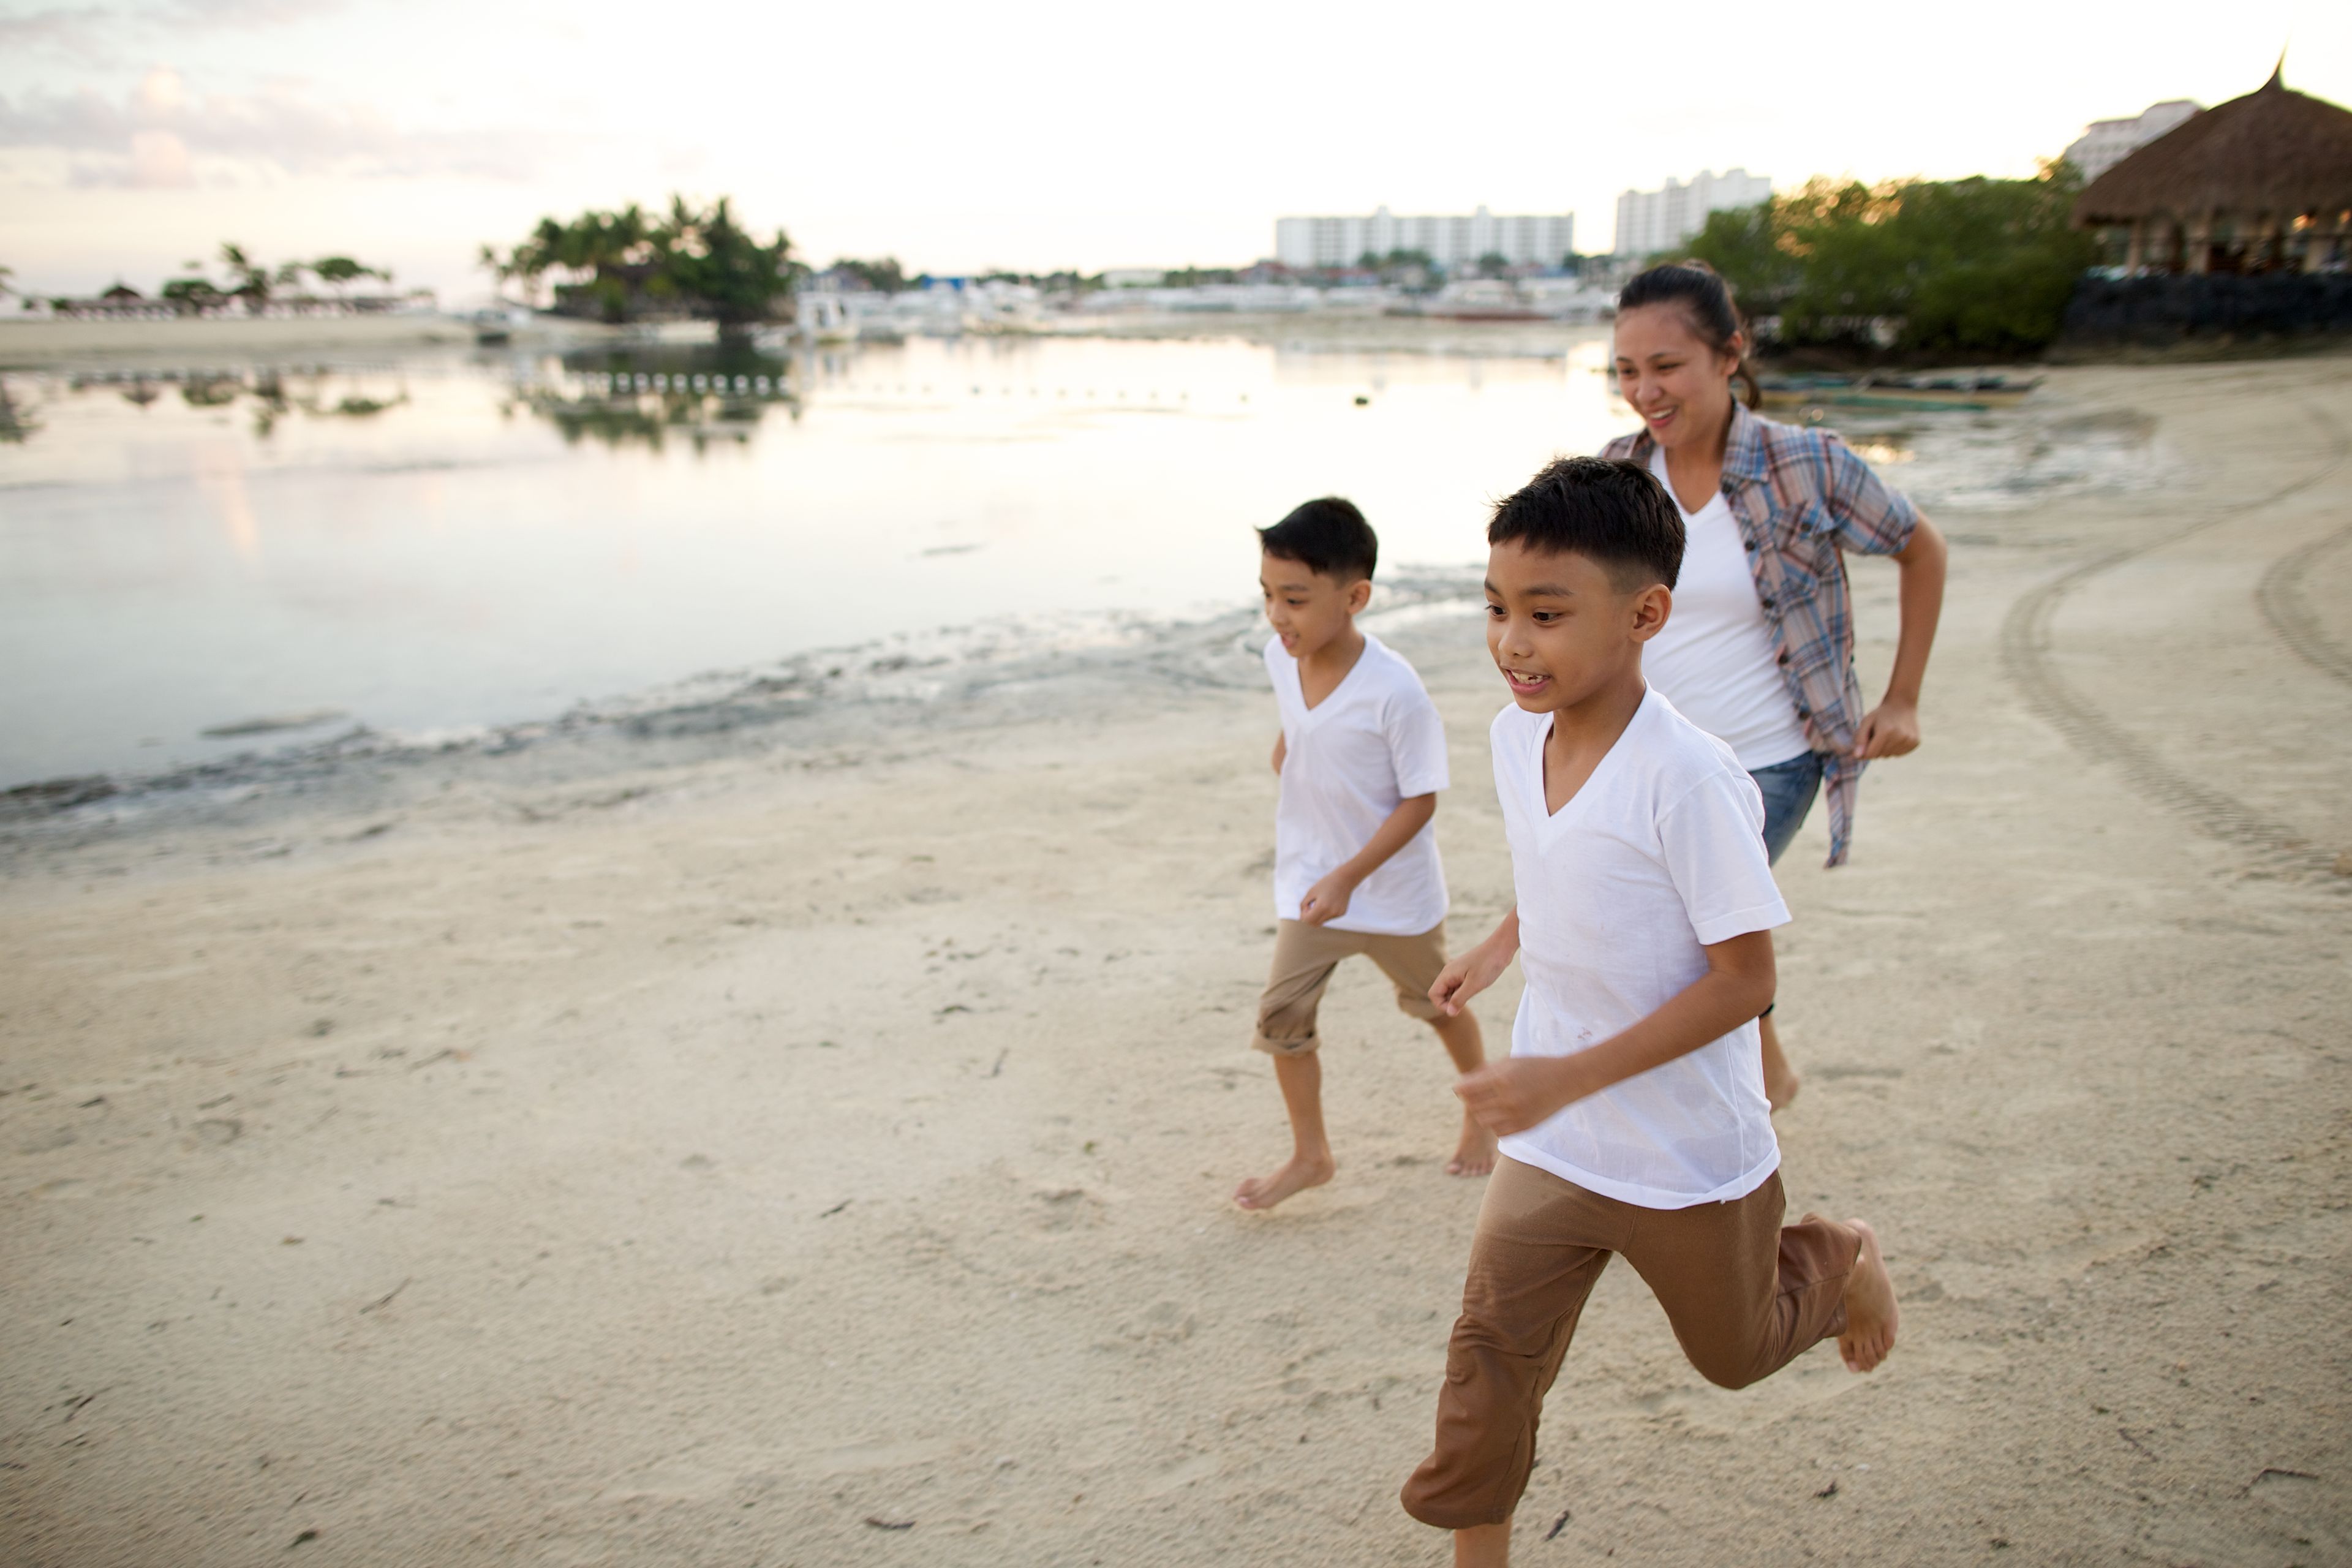 Two young boys run with their mother on a beach.